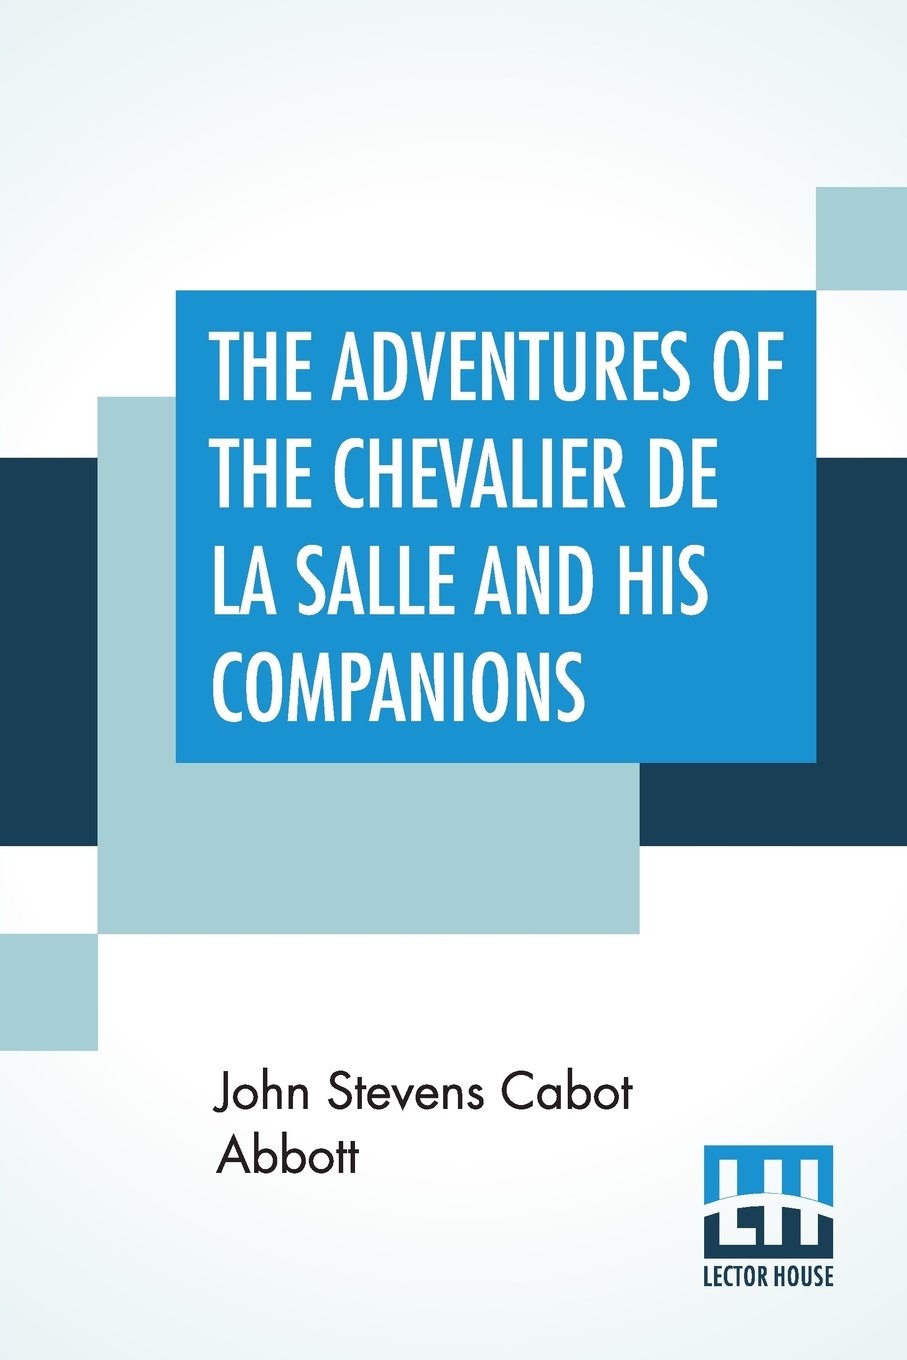 The Adventures Of The Chevalier De La Salle And His Companions. In Their Explorations Of The Prairies, Forests, Lakes, And Rivers, Of The New World, And Their Interviews With The Savage Tribes, Two Hundred Years Ago